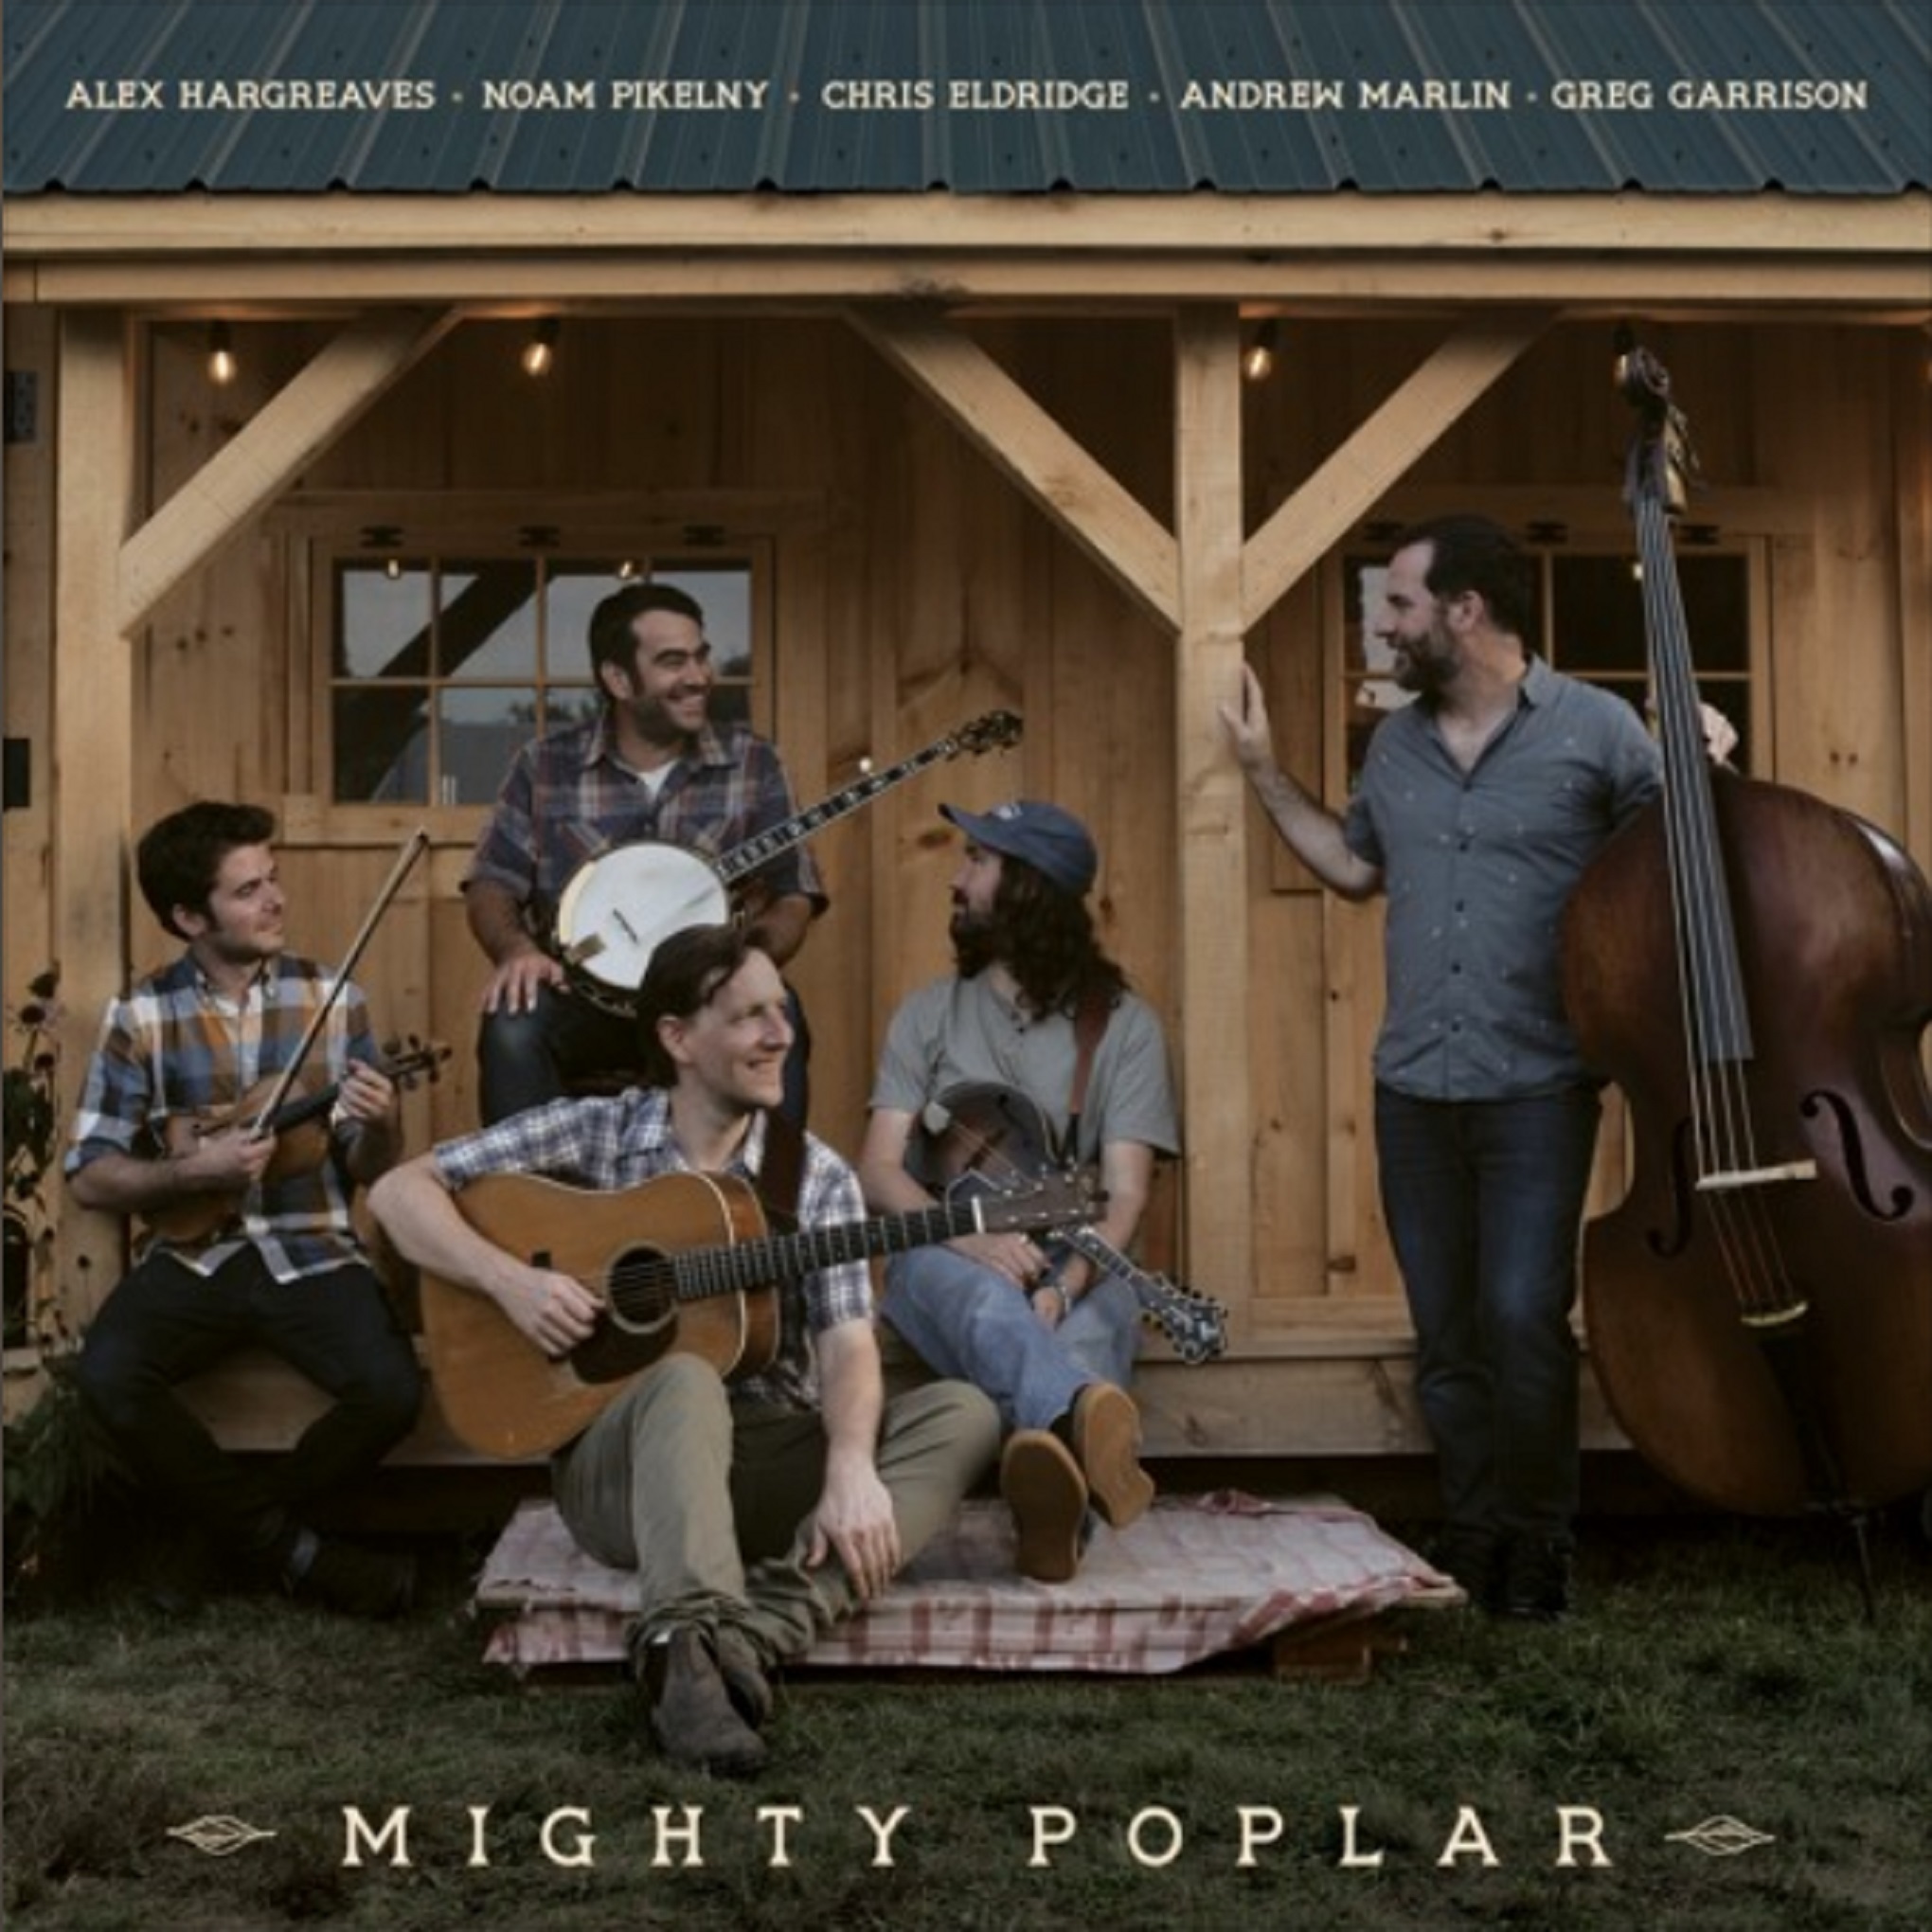 Mighty Poplar's self-titled record coming March 31st